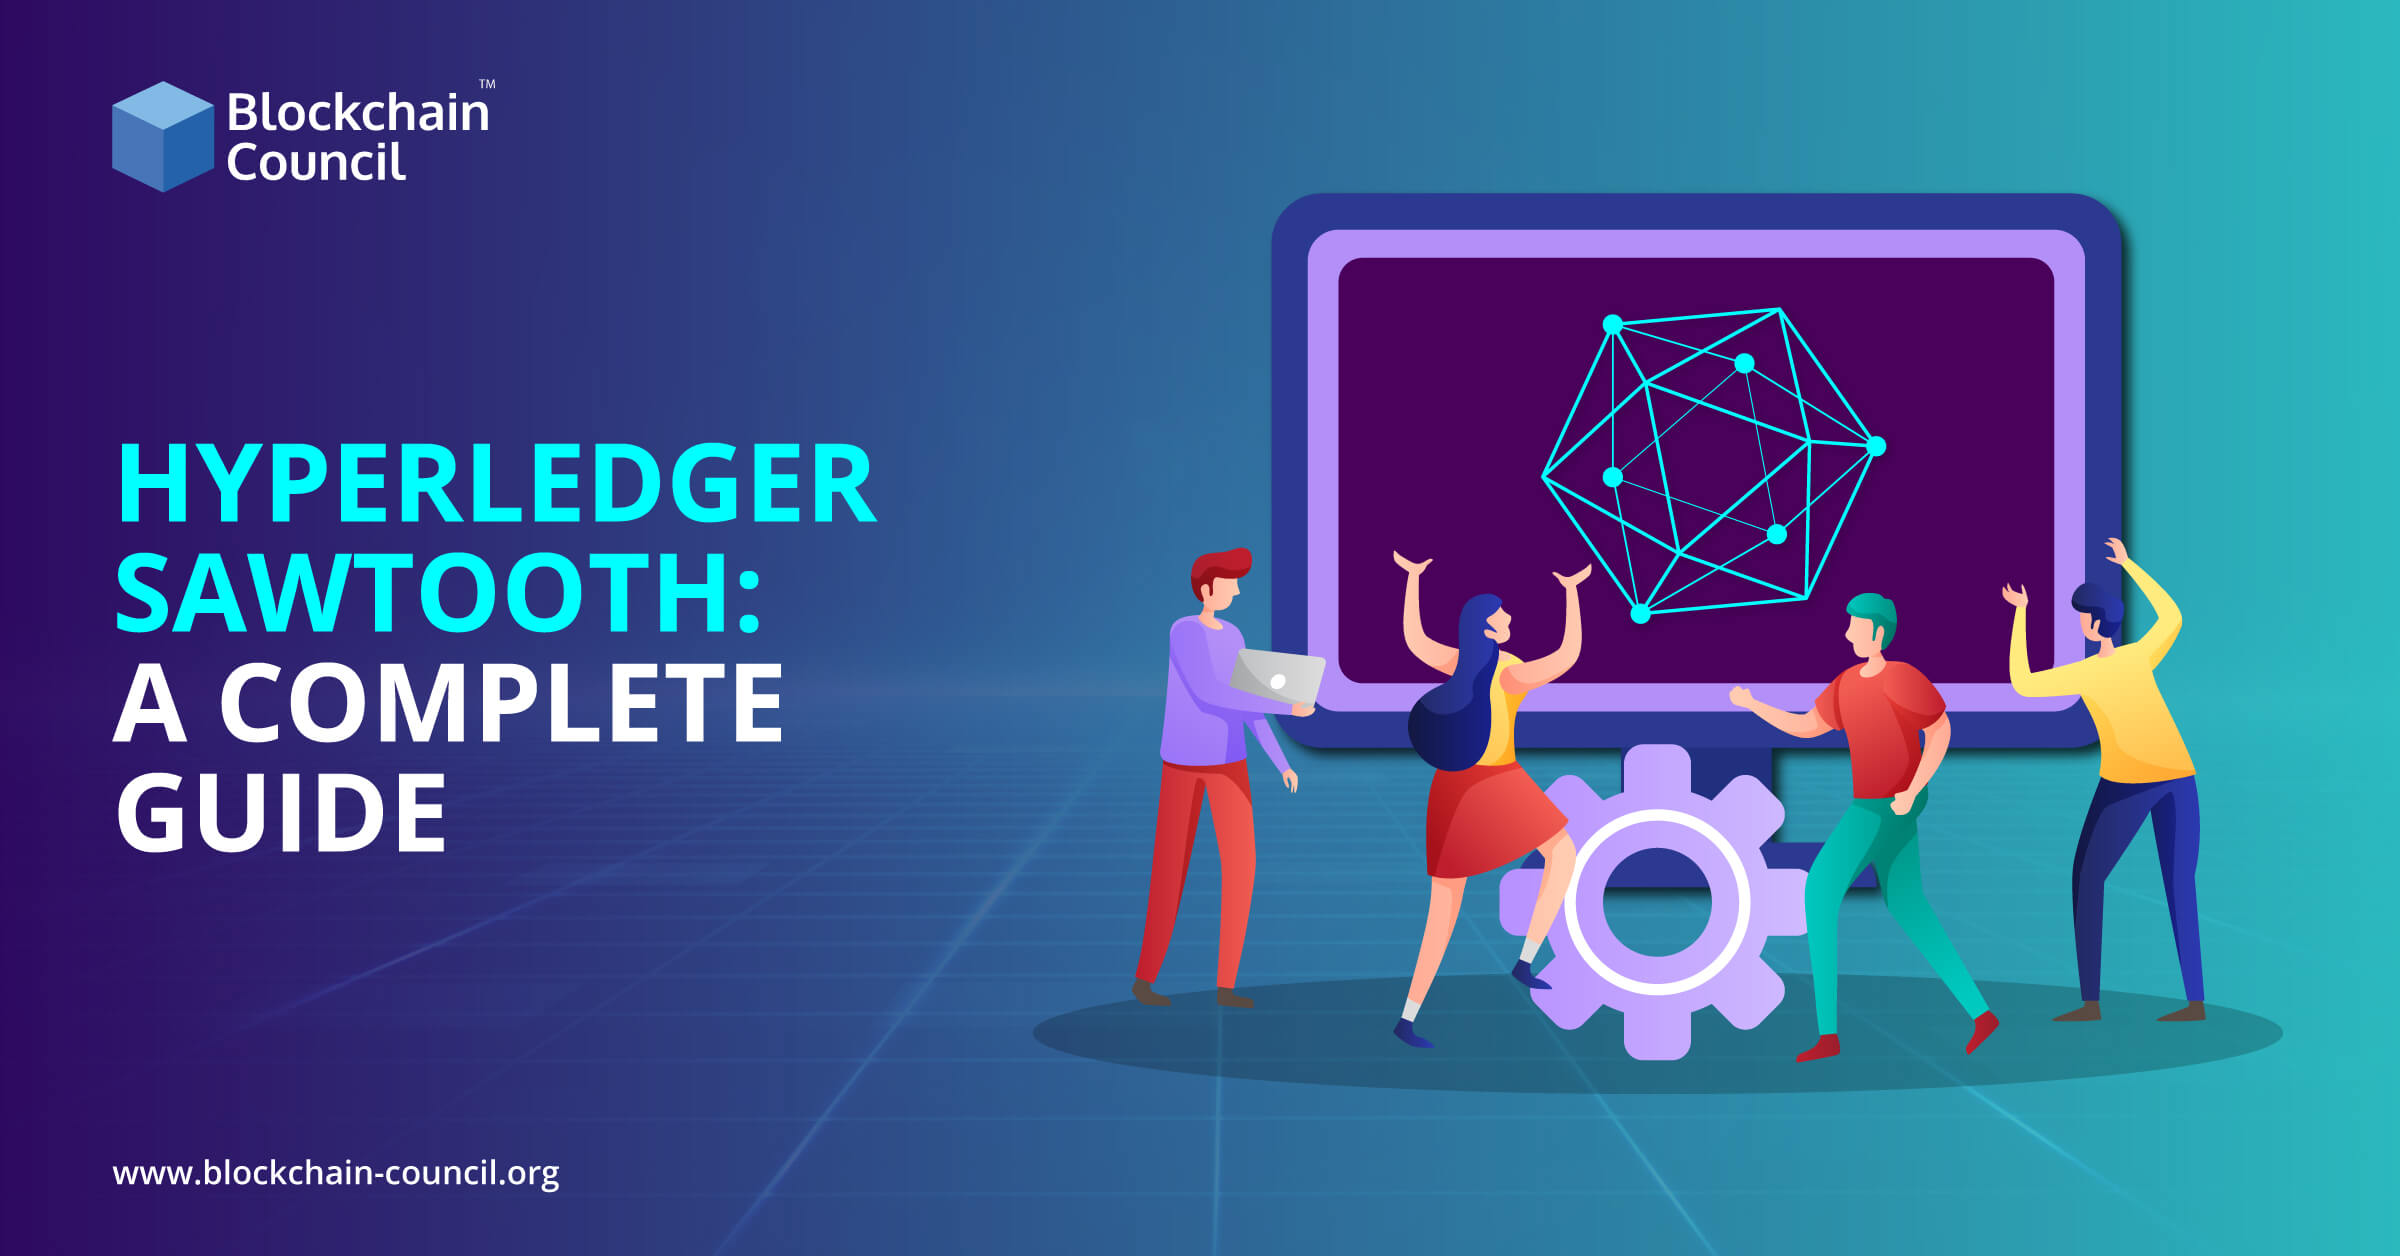 Hyperledger Sawtooth: A Complete Guide